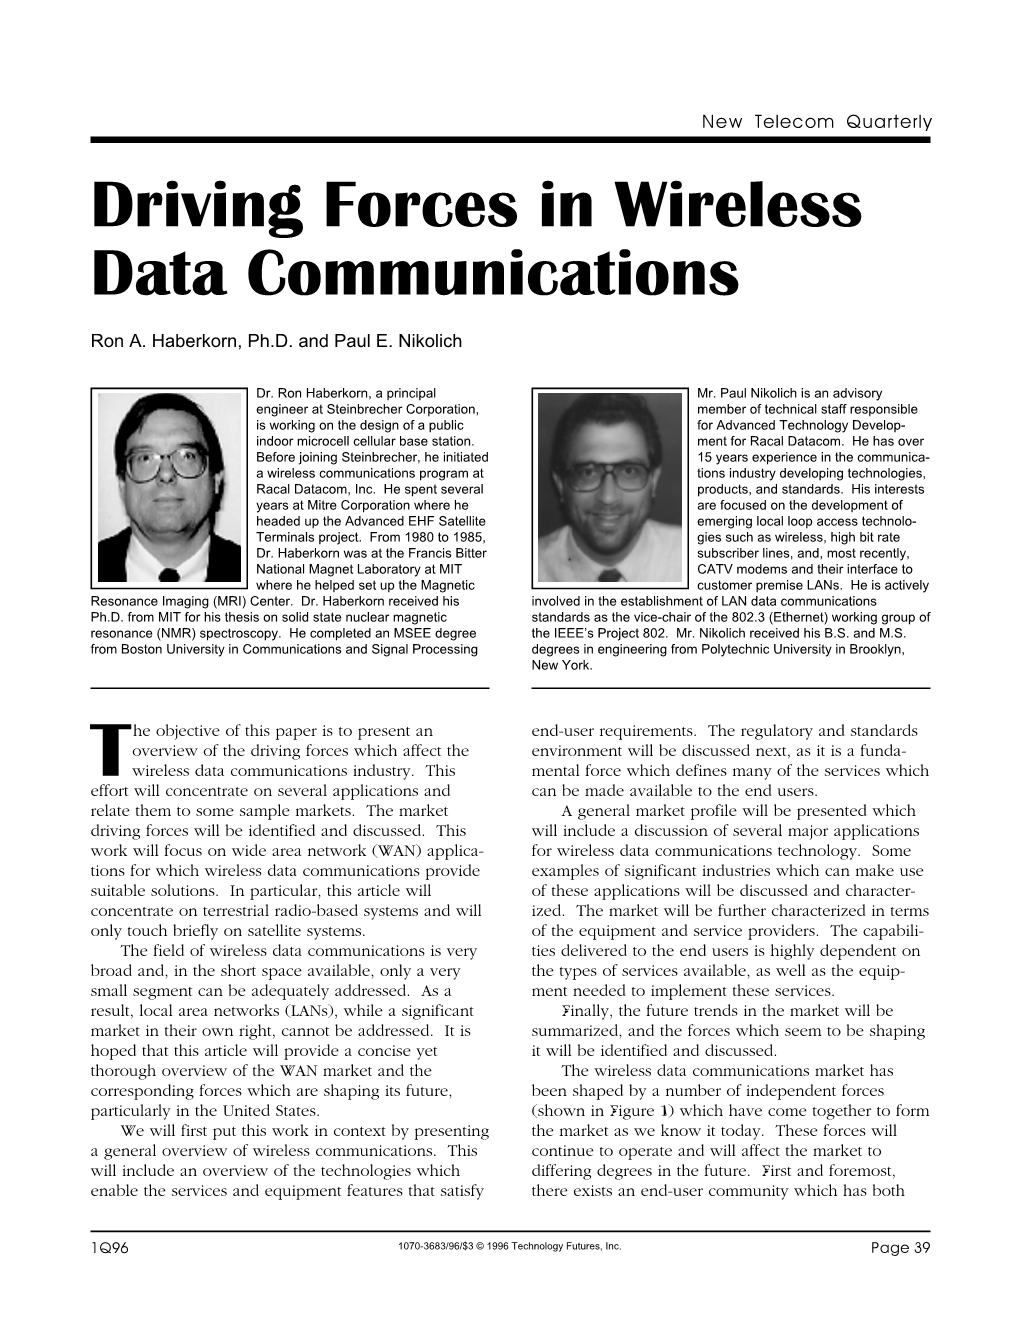 Driving Forces in Wireless Data Communications